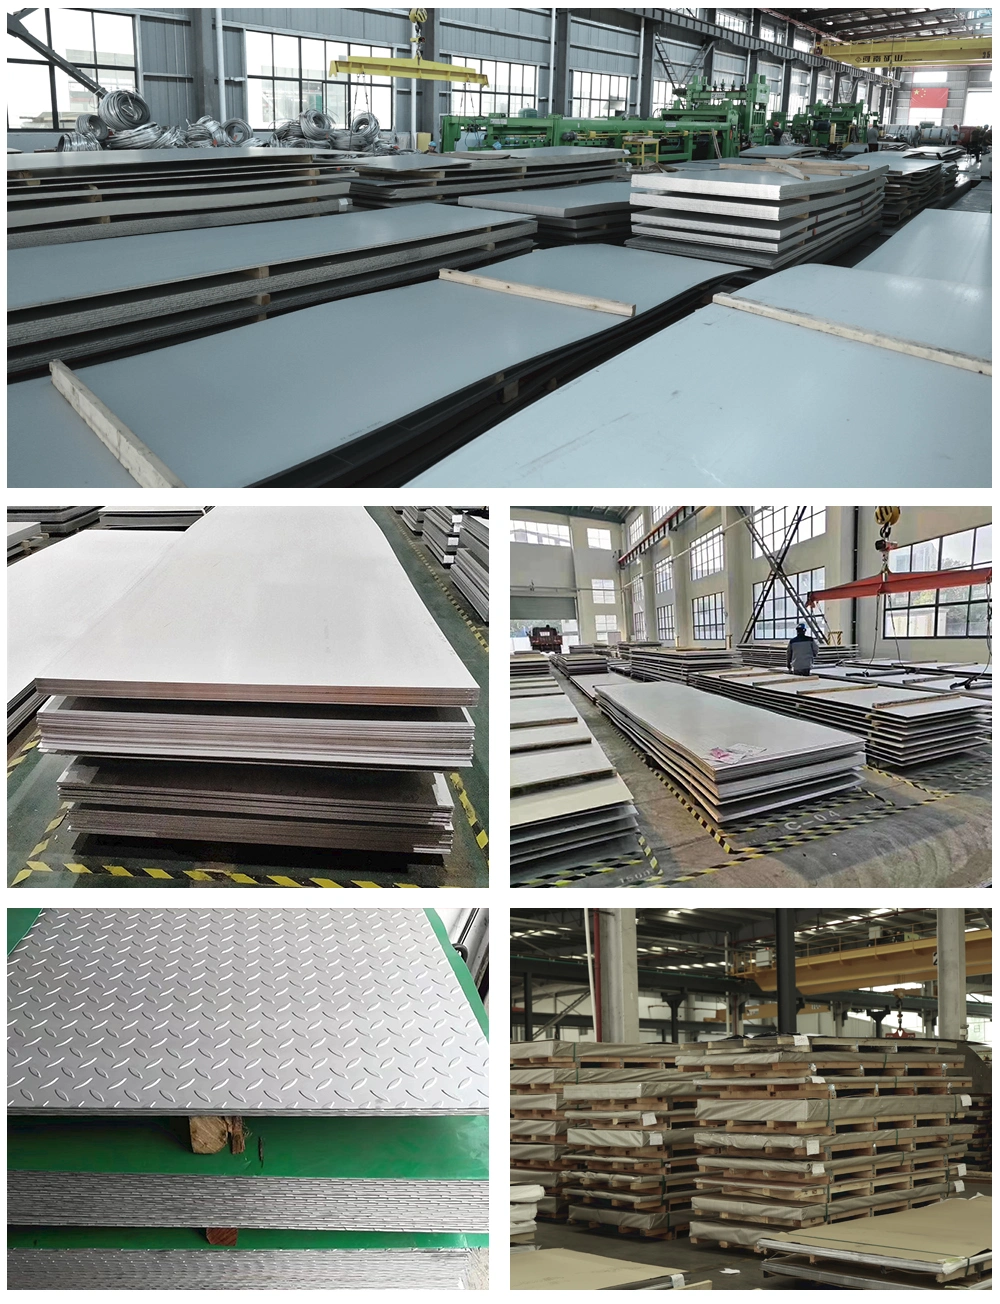 China Factory 600 601 625 718 725 750 800 825 Inconel Incoloy Monel Nickle Hastelloy Alloy Sheet Plate with Facotry Price